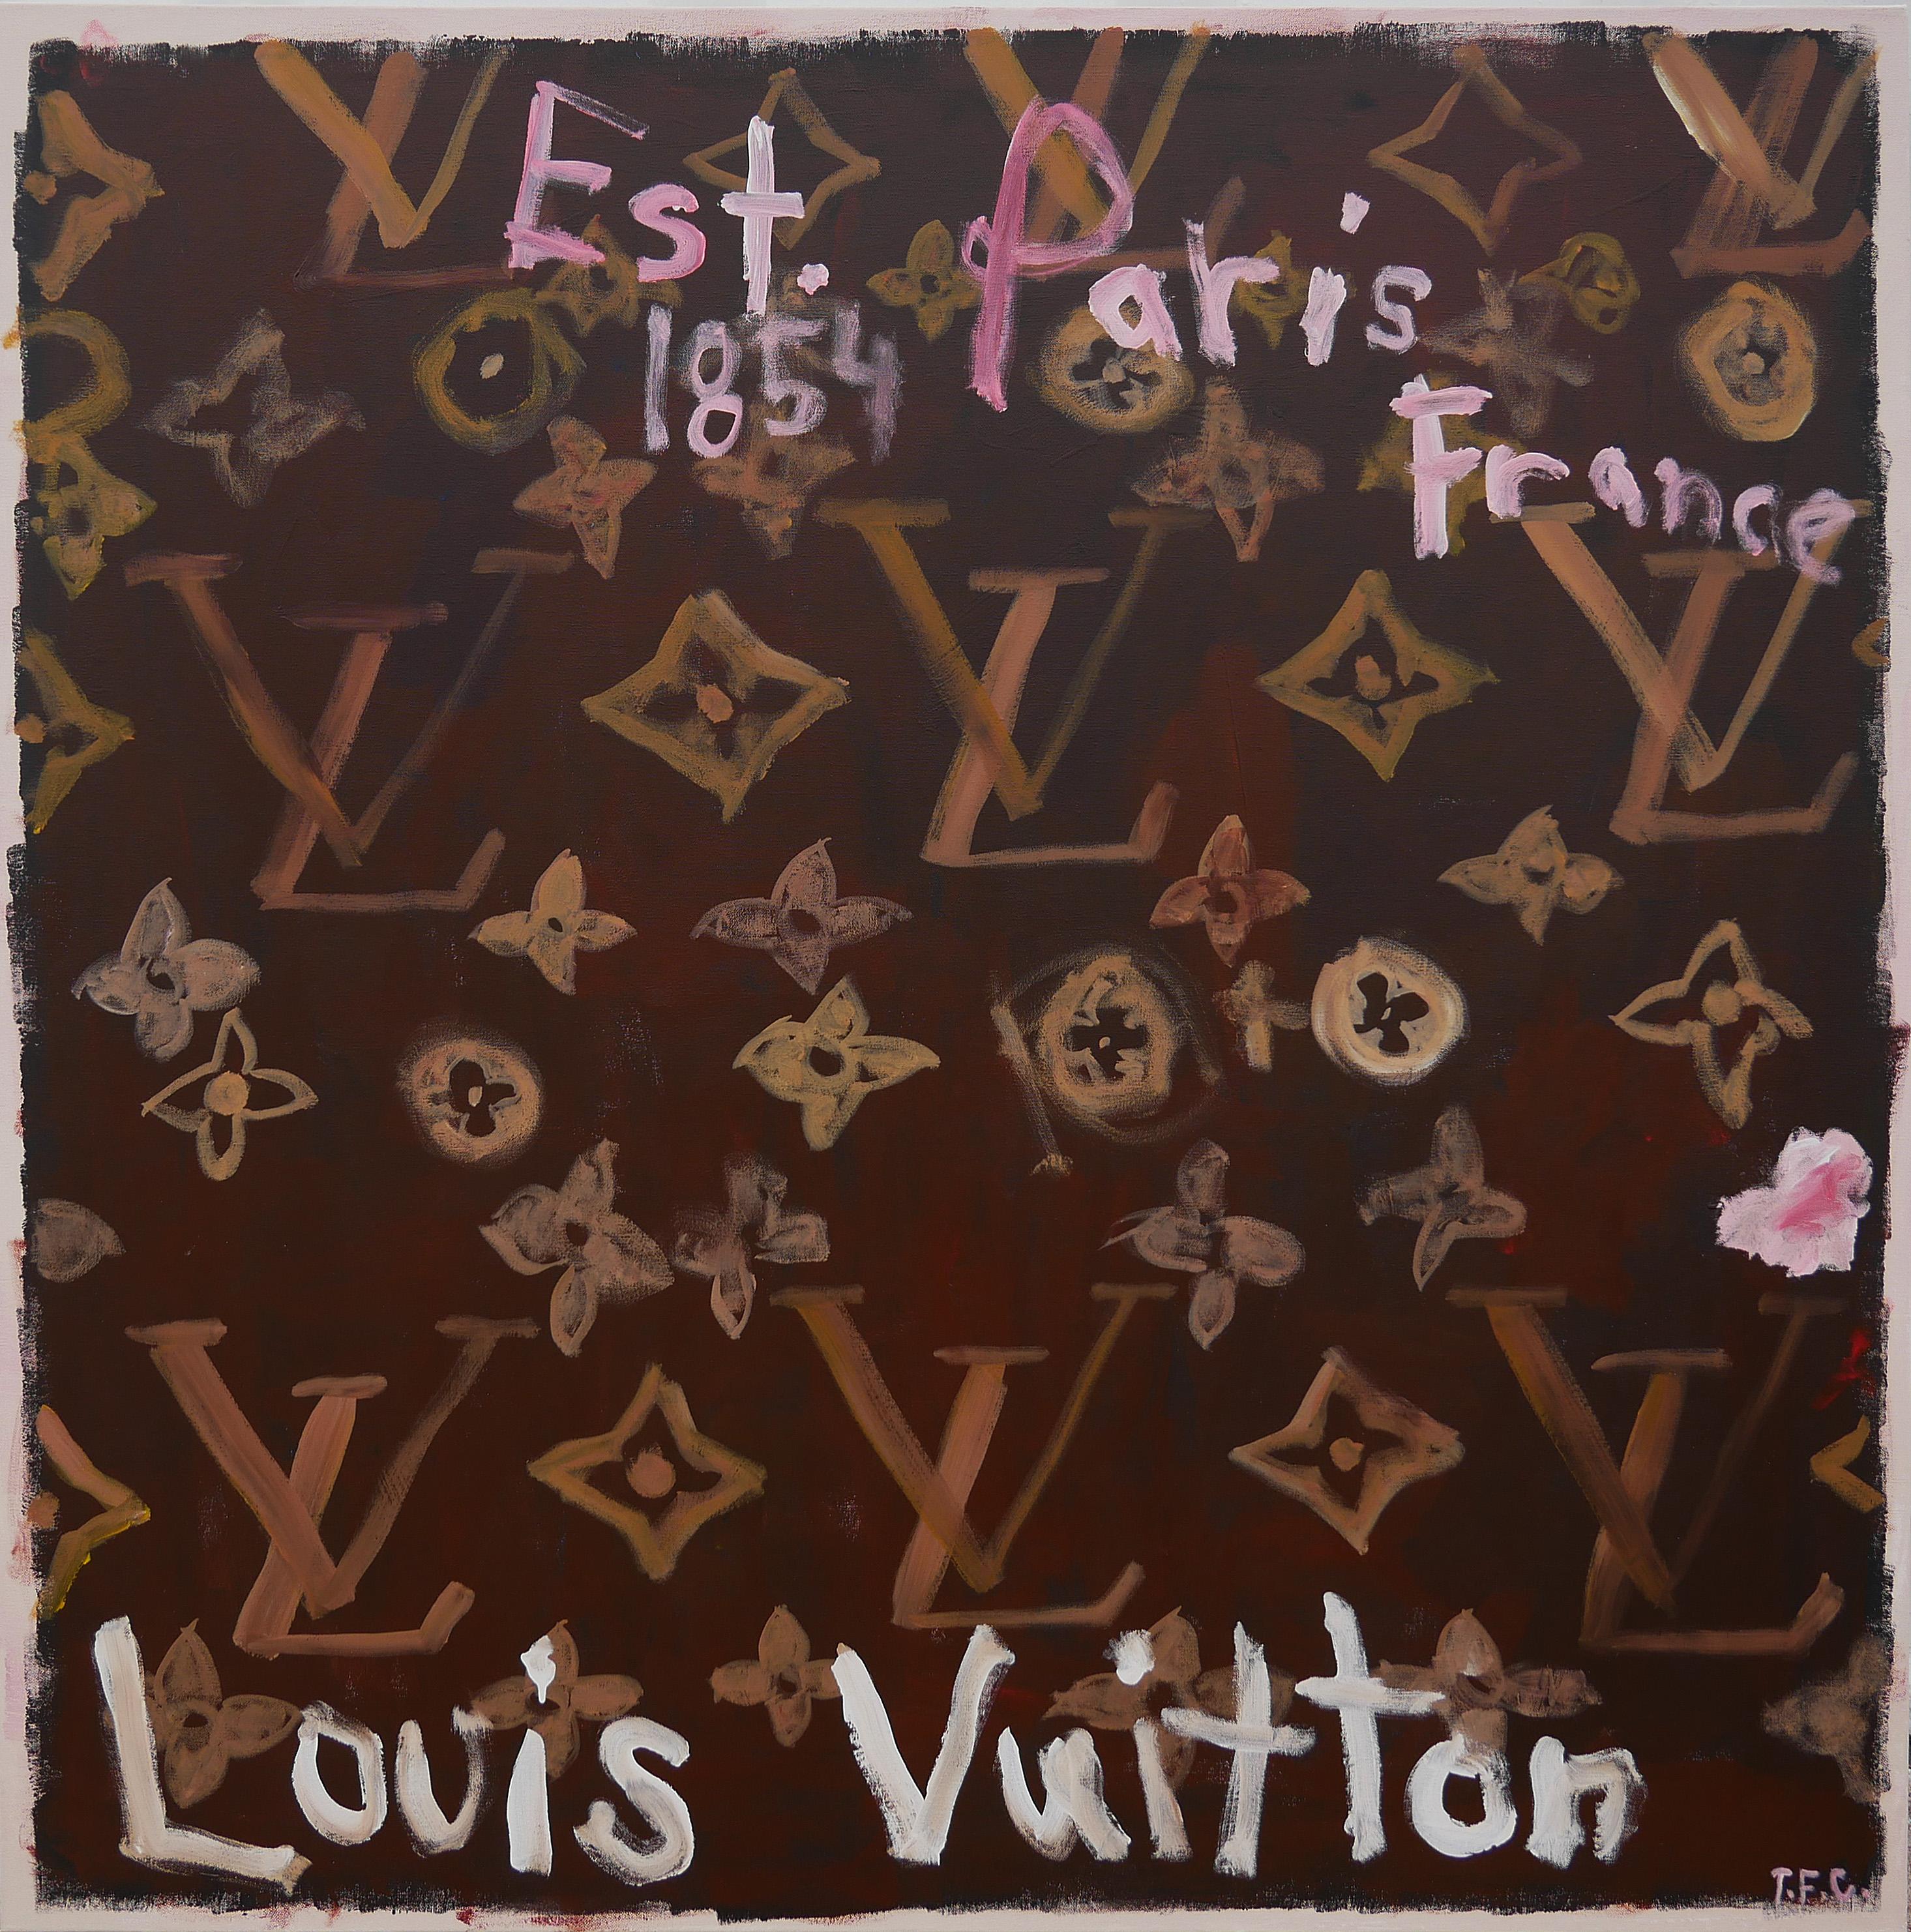 Tyler Casey - "Louis Vuitton" Contemporary Abstract Pop Art Painting of LV  Monogram with Pink For Sale at 1stDibs